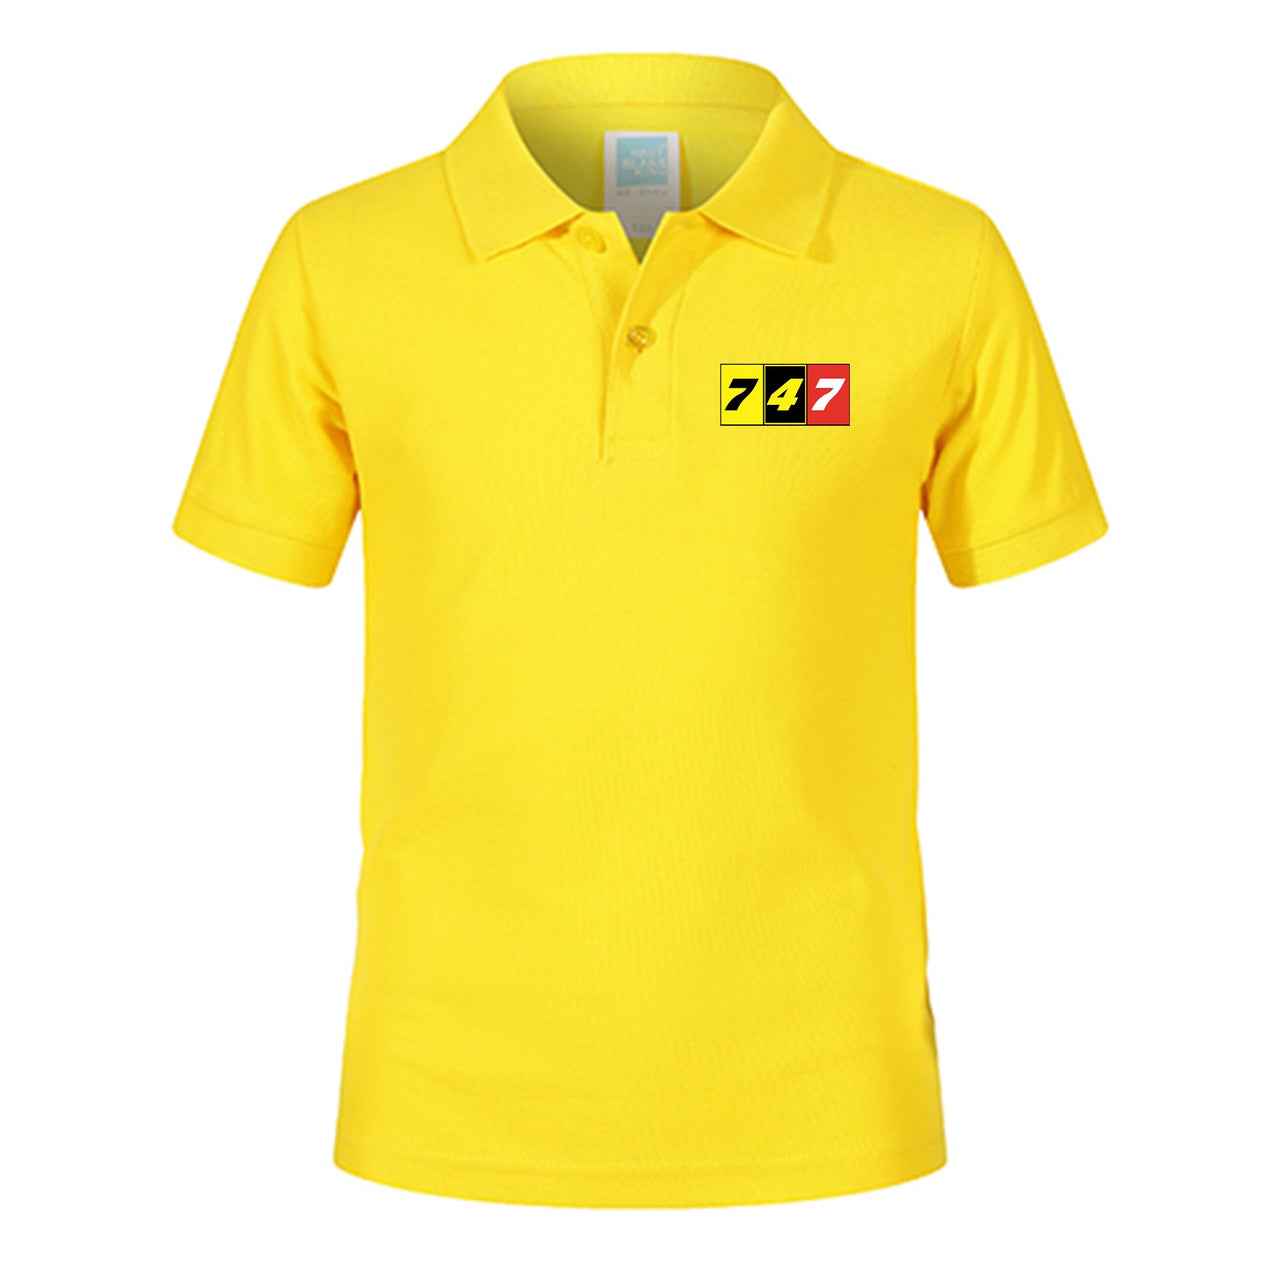 Flat Colourful 747 Designed Children Polo T-Shirts